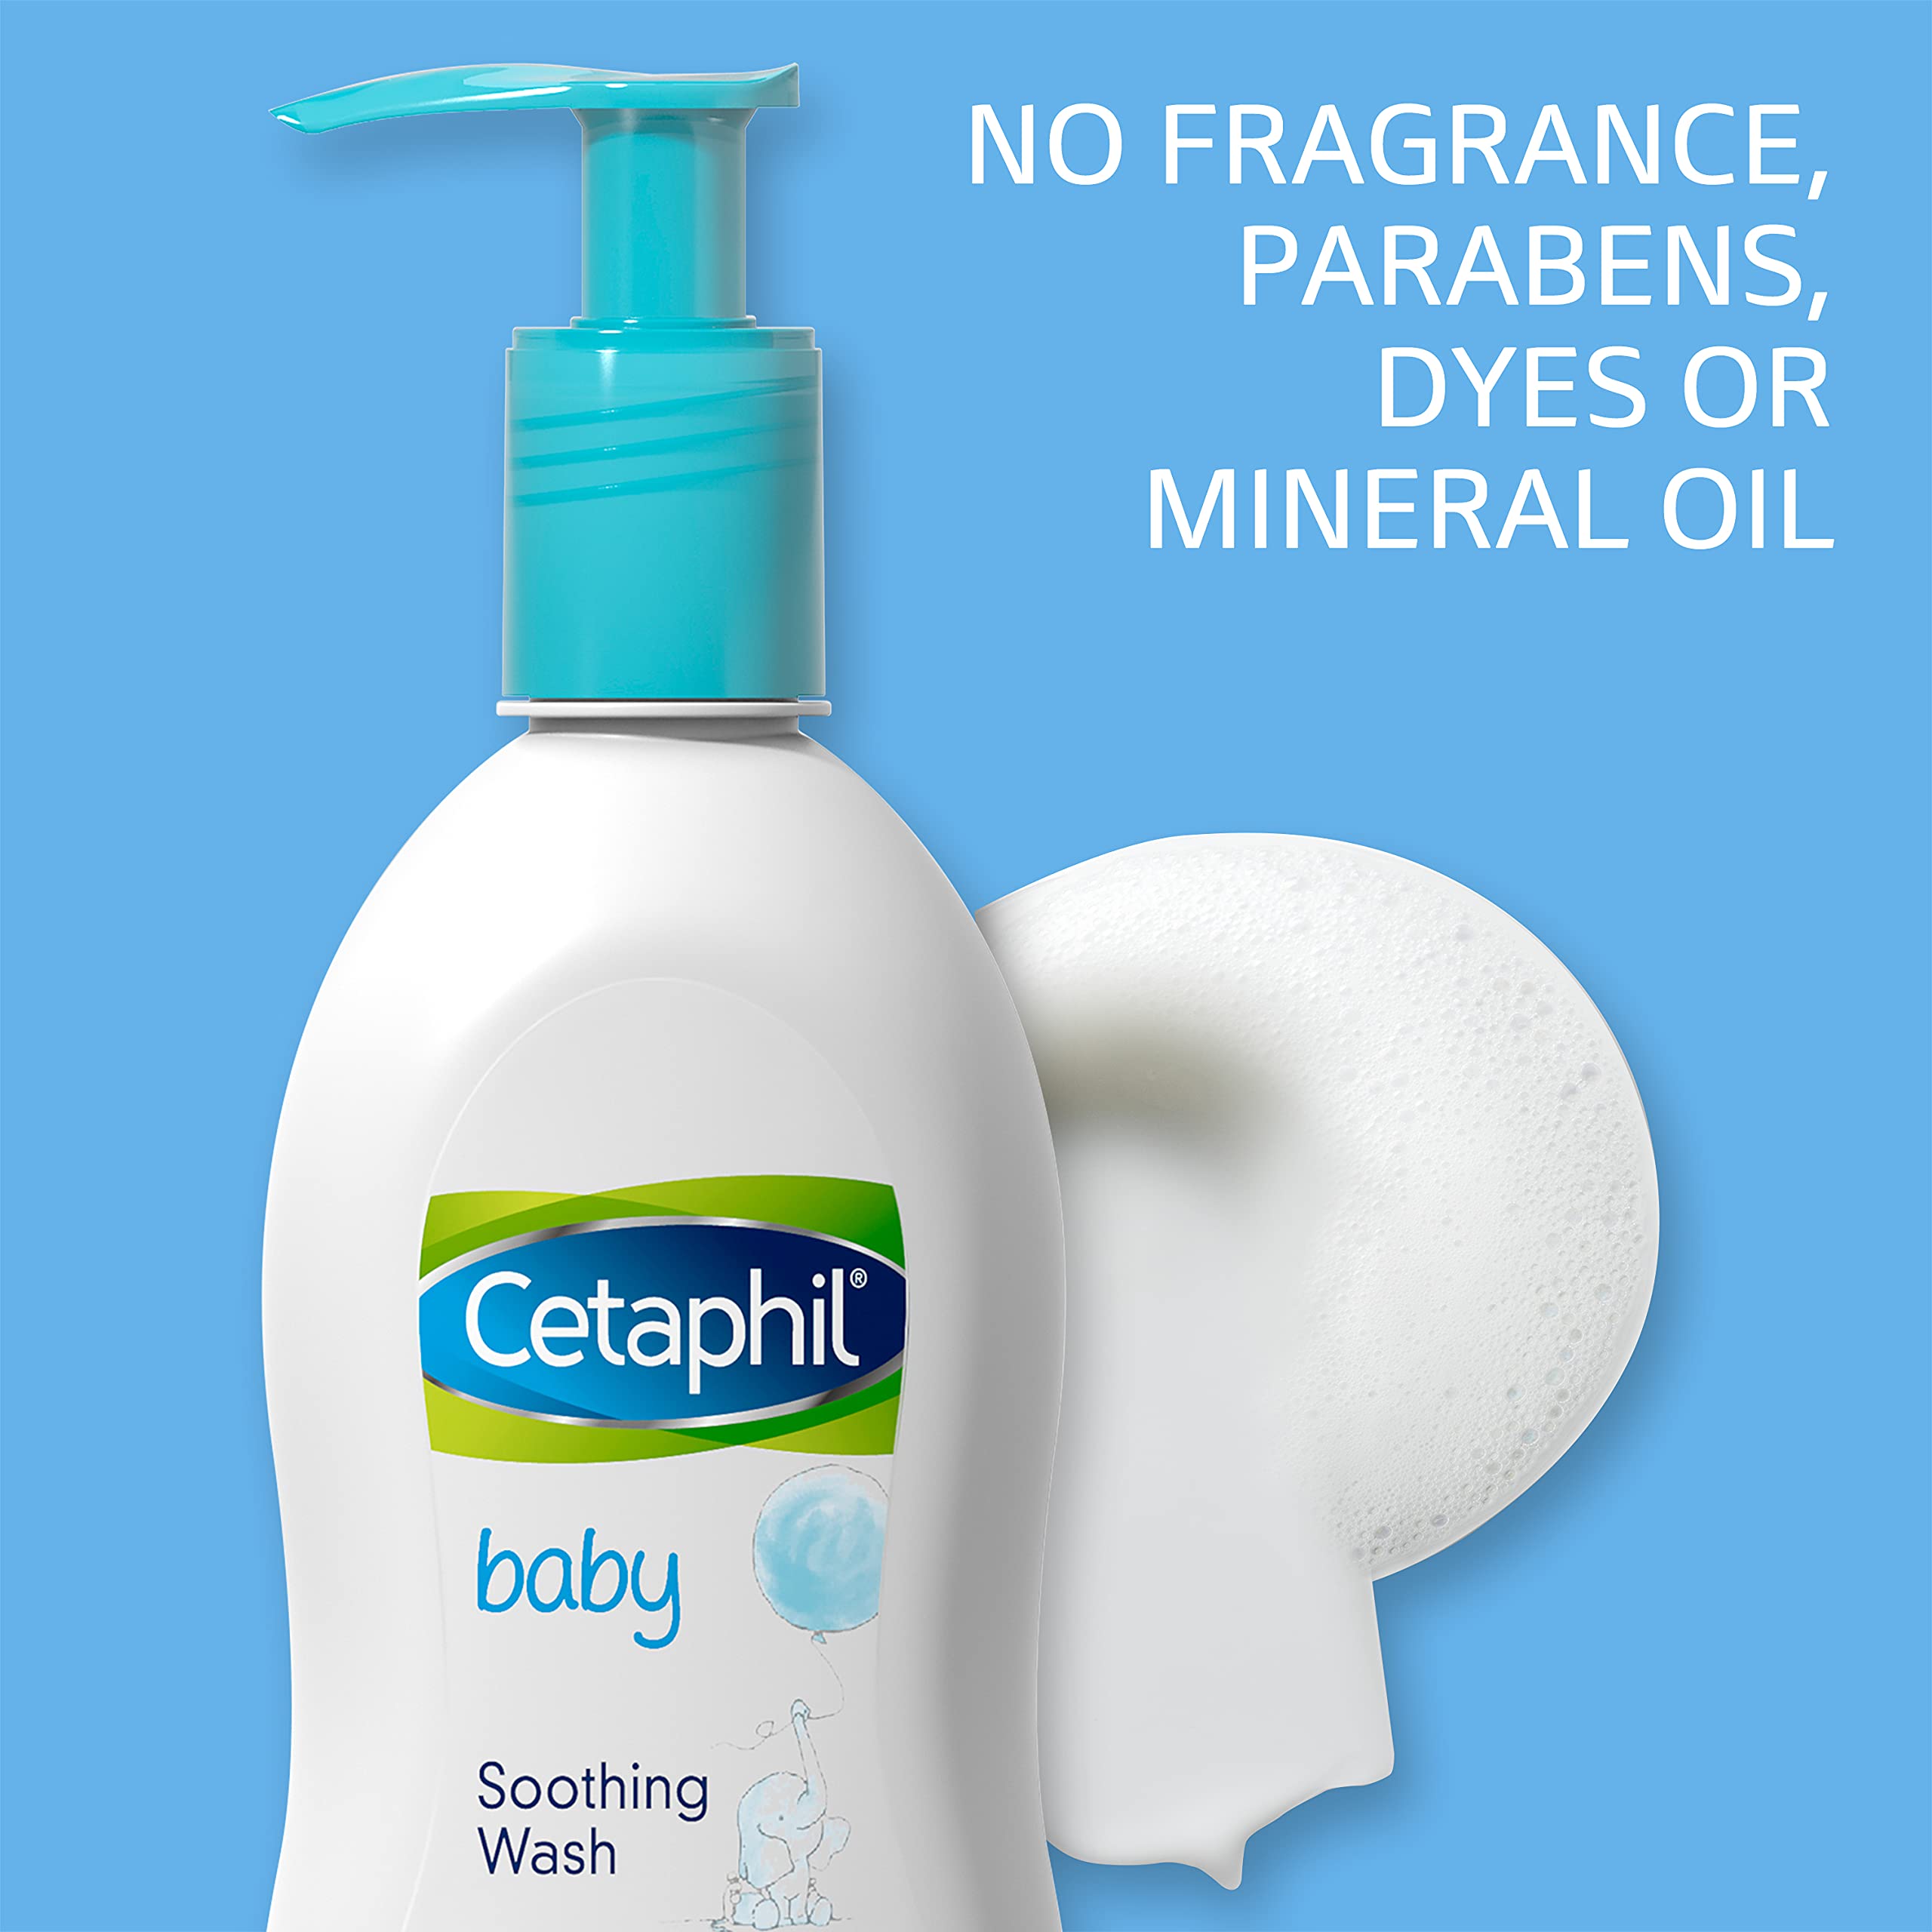 Cetaphil Baby Body Wash, Soothing Wash, Creamy & Gentle for Sensitive Dry Skin, Made with Colloidal Oatmeal and Niacinamide, Fragrance Free, Hypoallergenic, 5oz